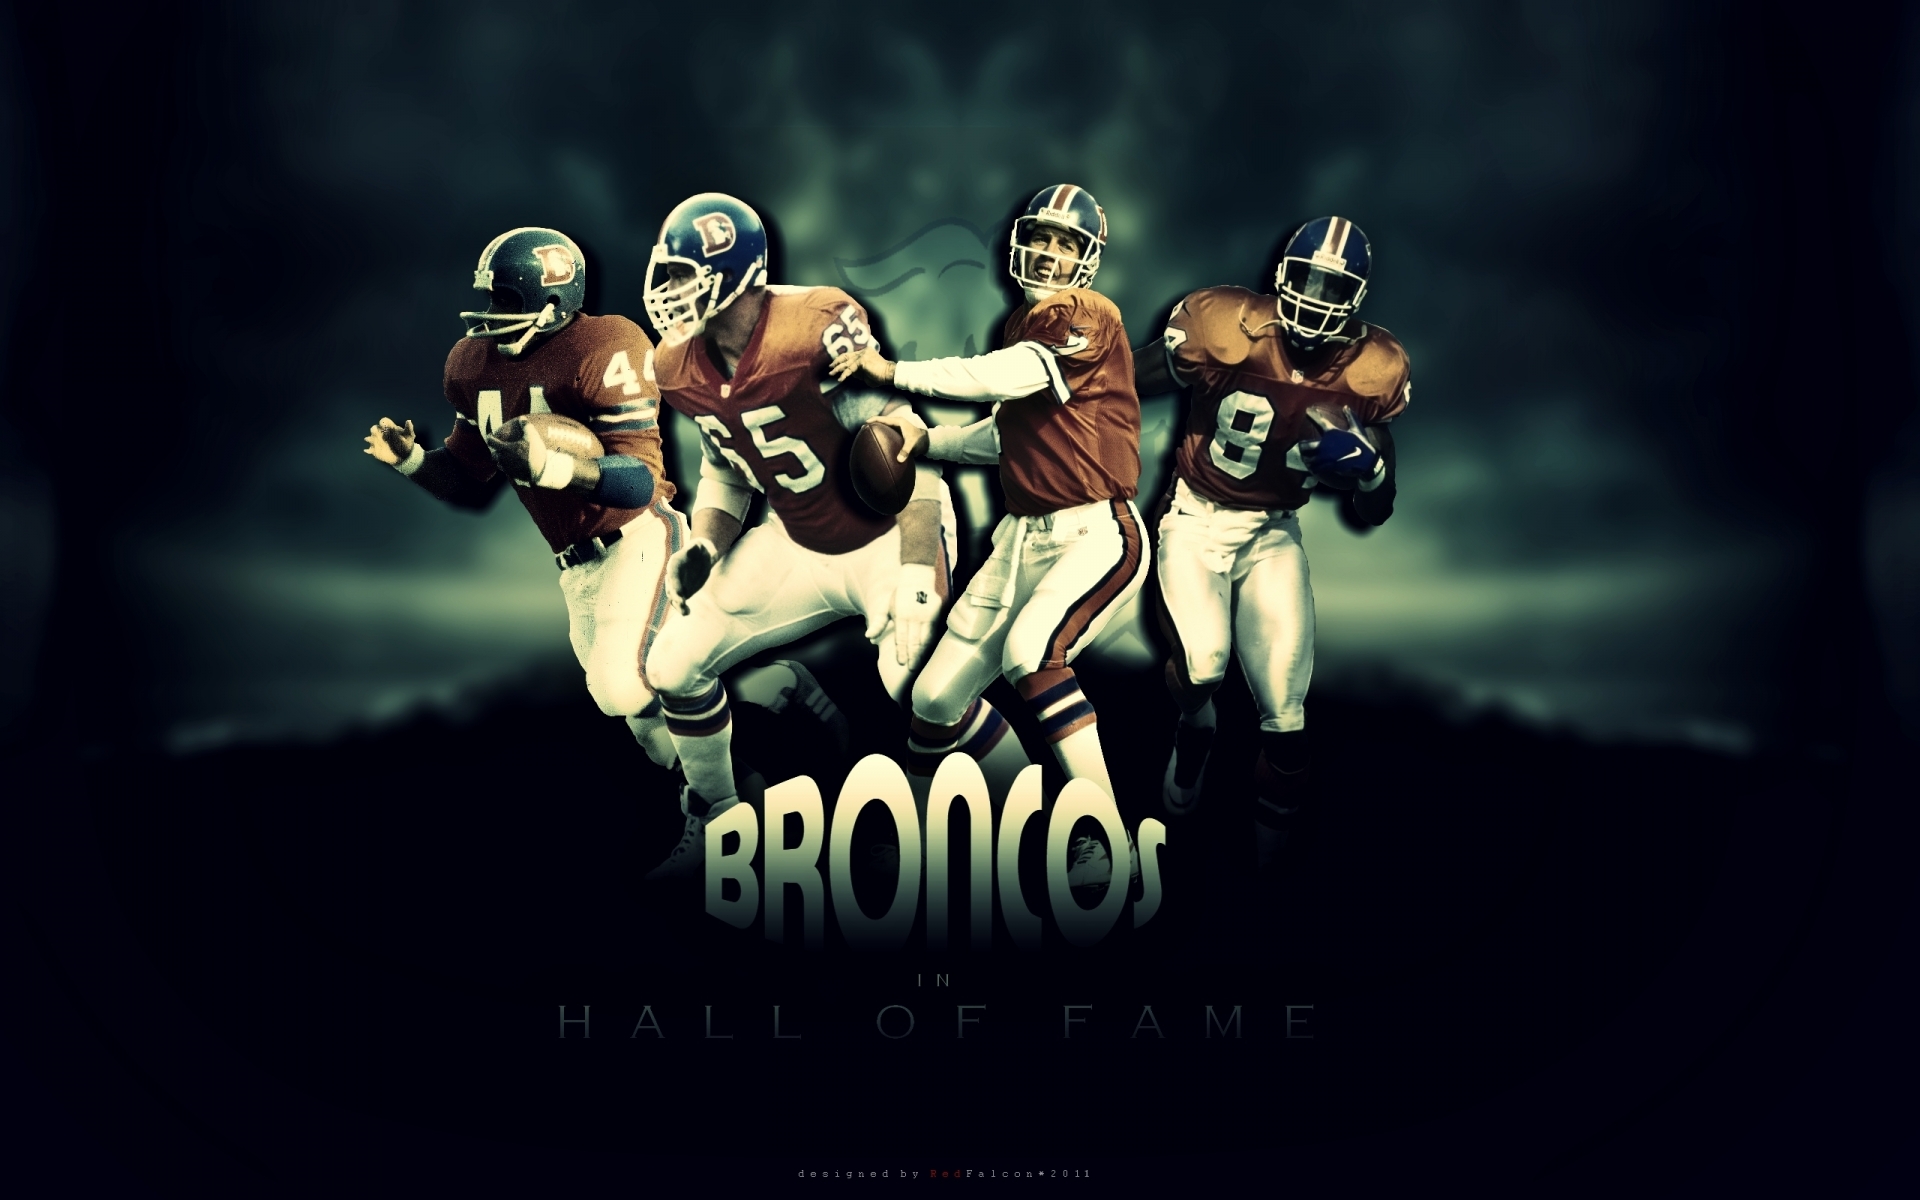 Broncos Hall of Fame for 1920 x 1200 widescreen resolution